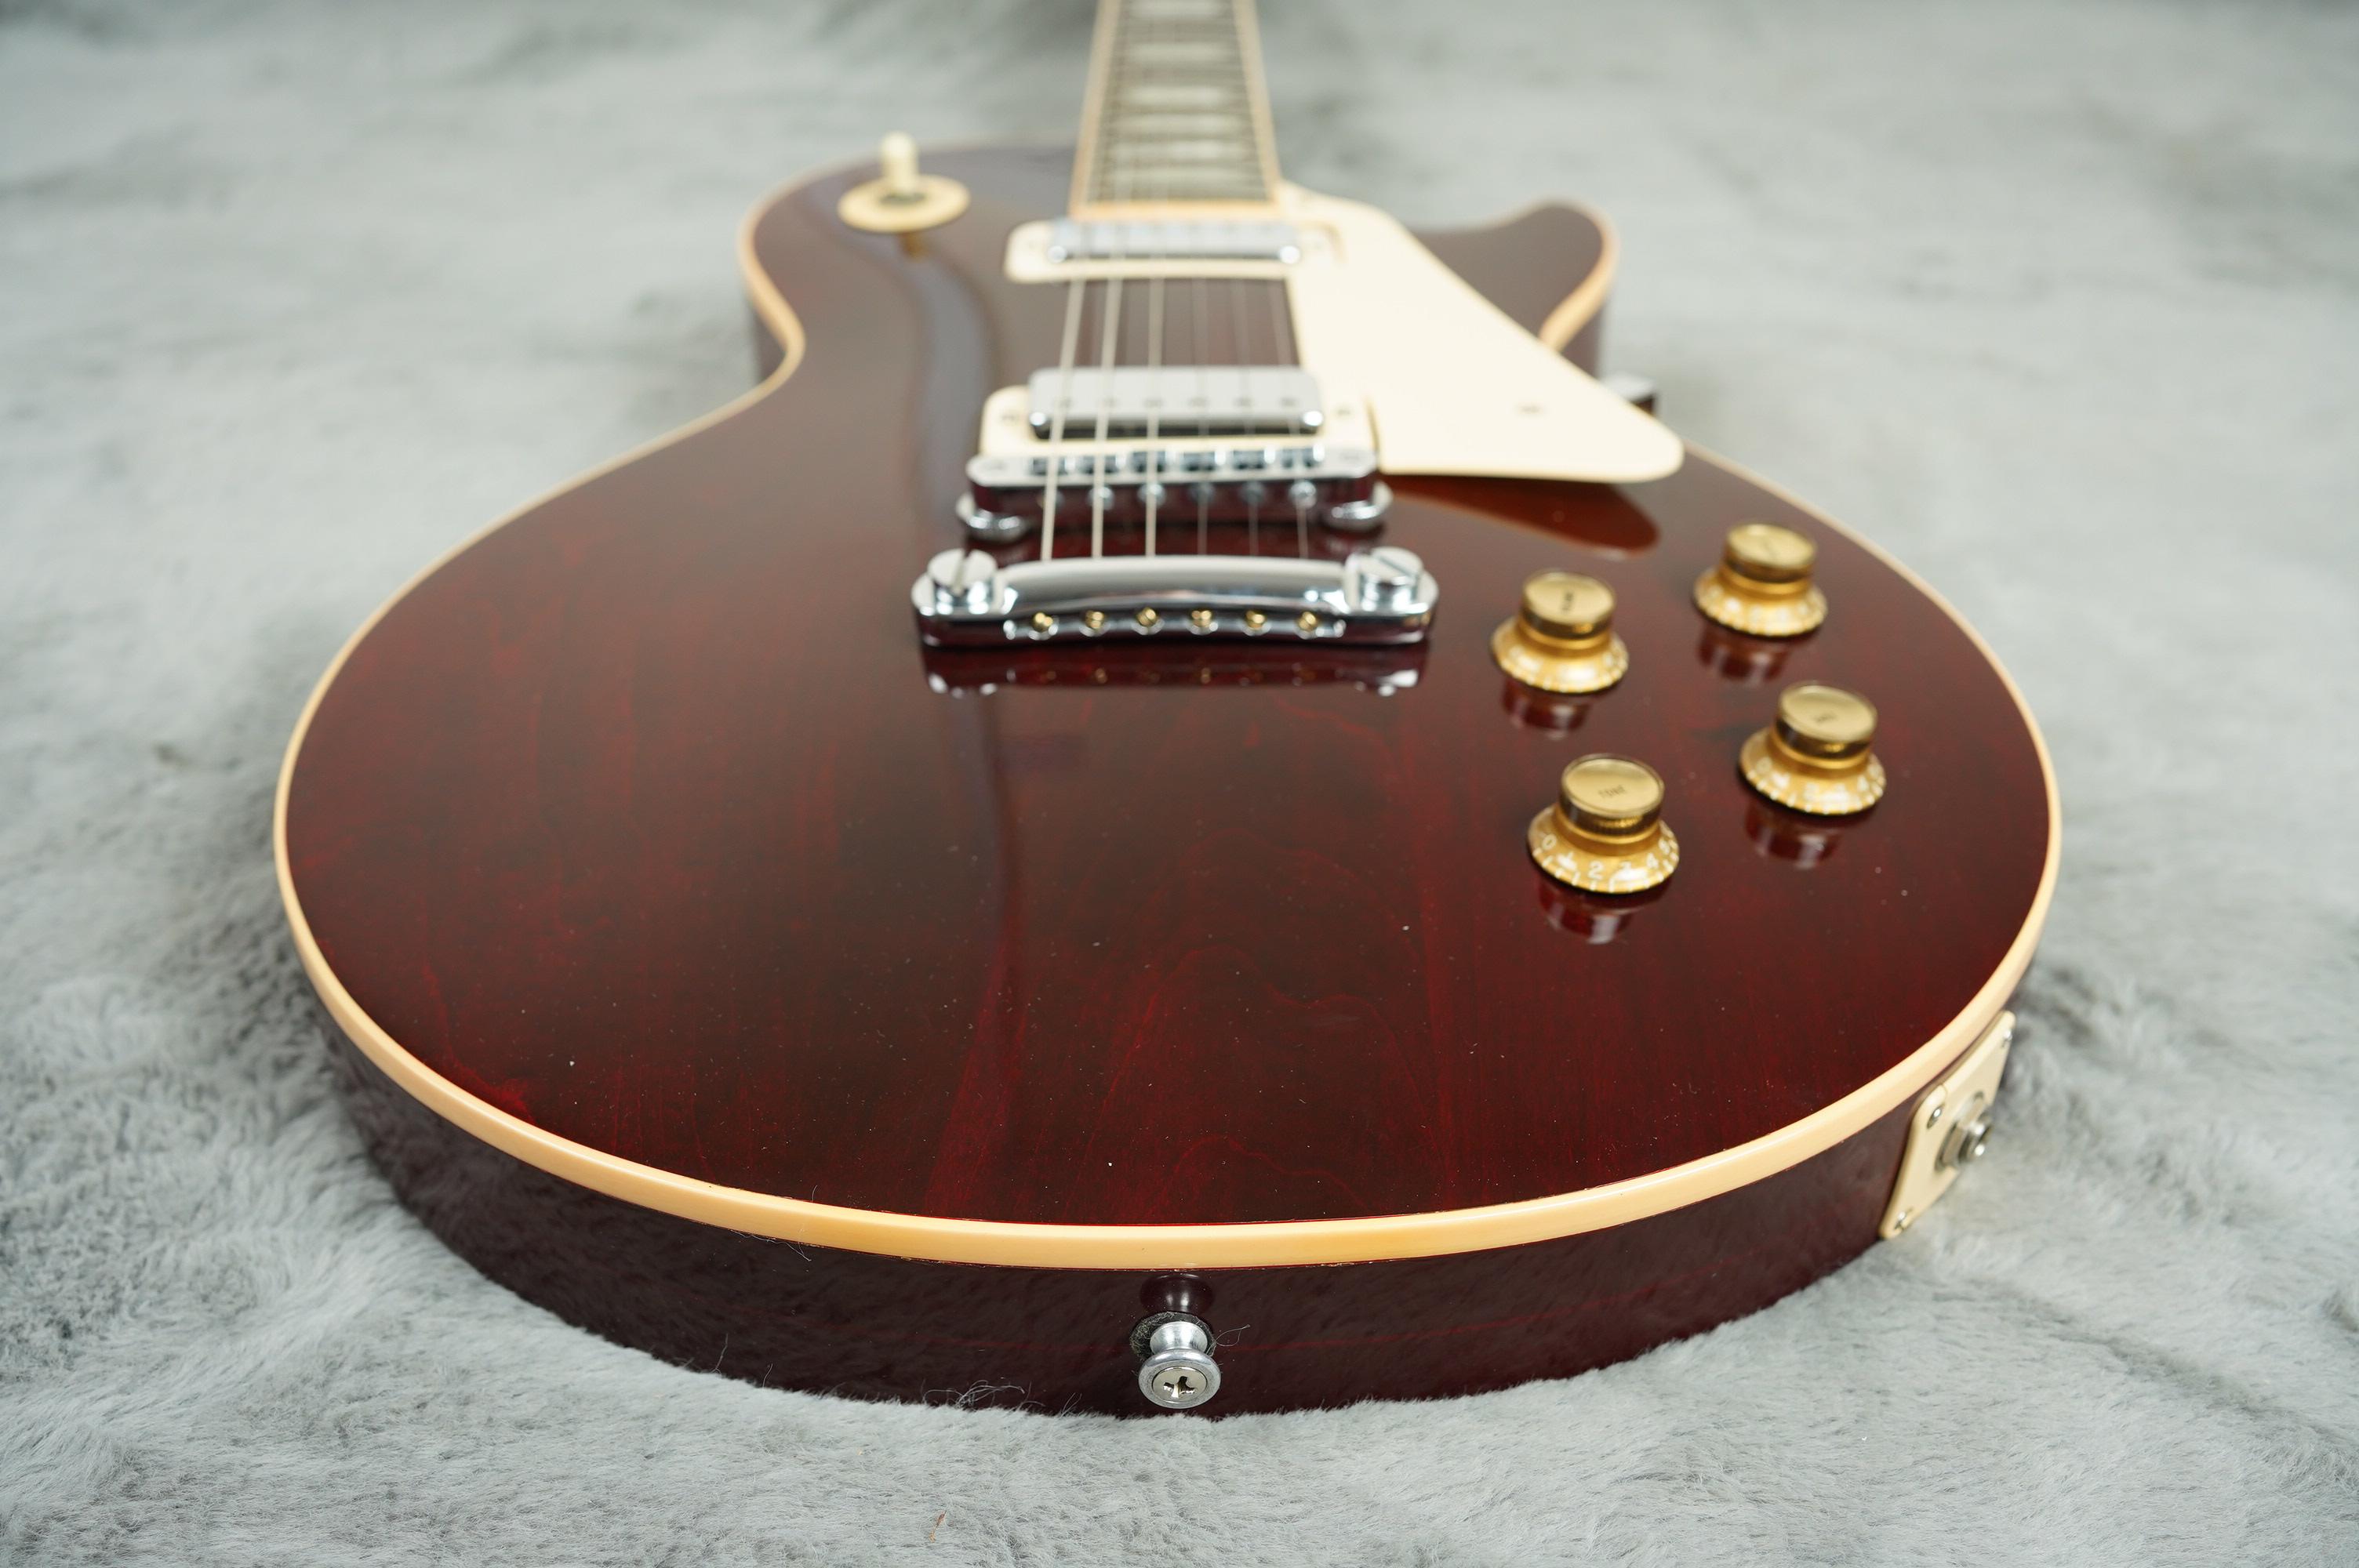 1976 Gibson Les Paul Deluxe